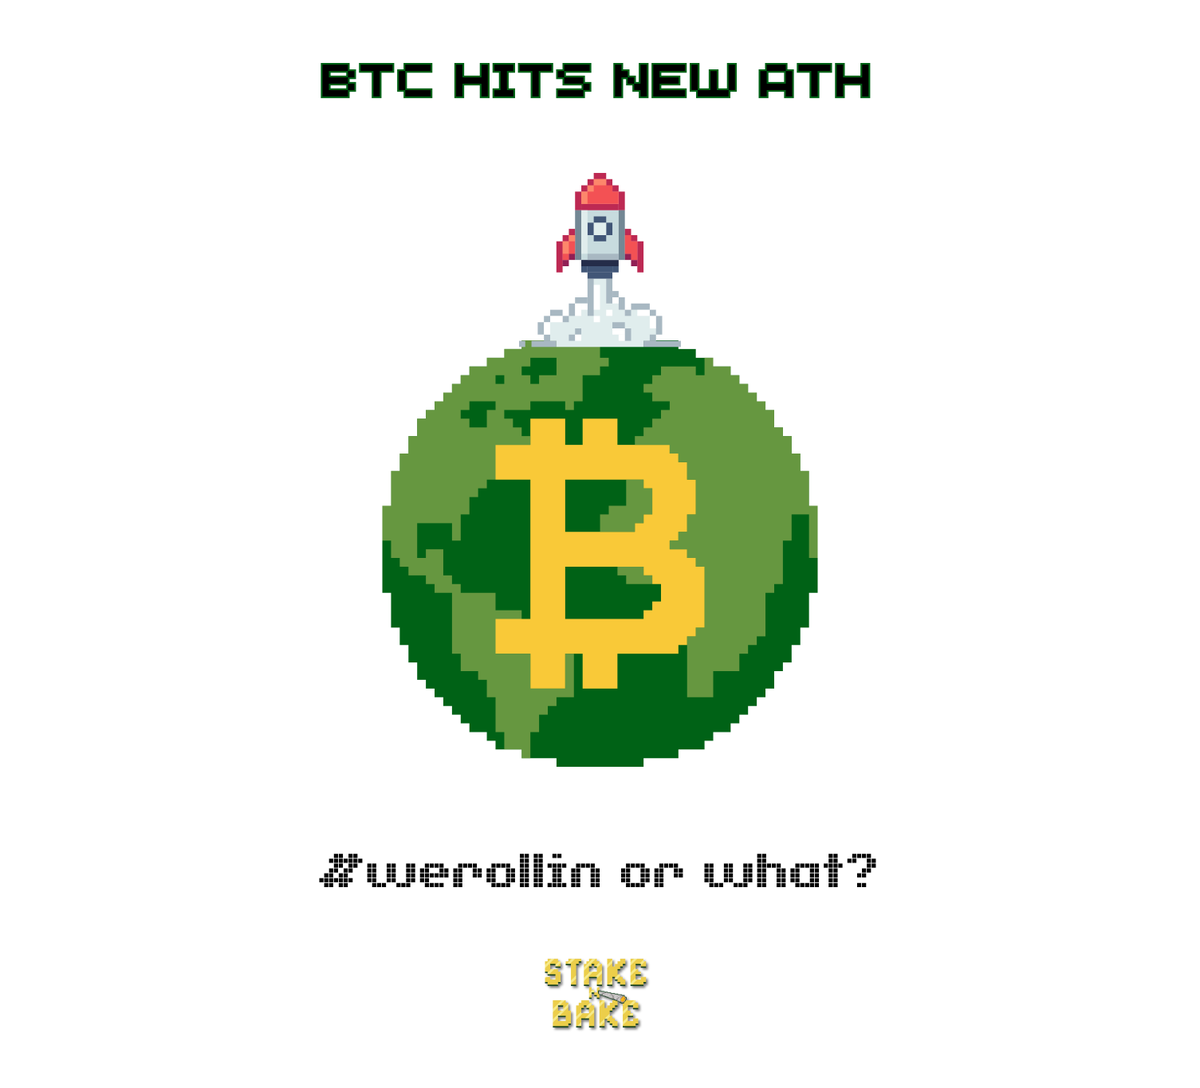 #werollin or what? 💥

as #Bitcoin breaks its ATH, chads will tell you it's time to touch grass. 

we say - its prime time to light up some grass. hit a doob, and admire the view (read: the gains). 

and keep some ready for when you play our beta. 

launch imminent.

#touchgrass